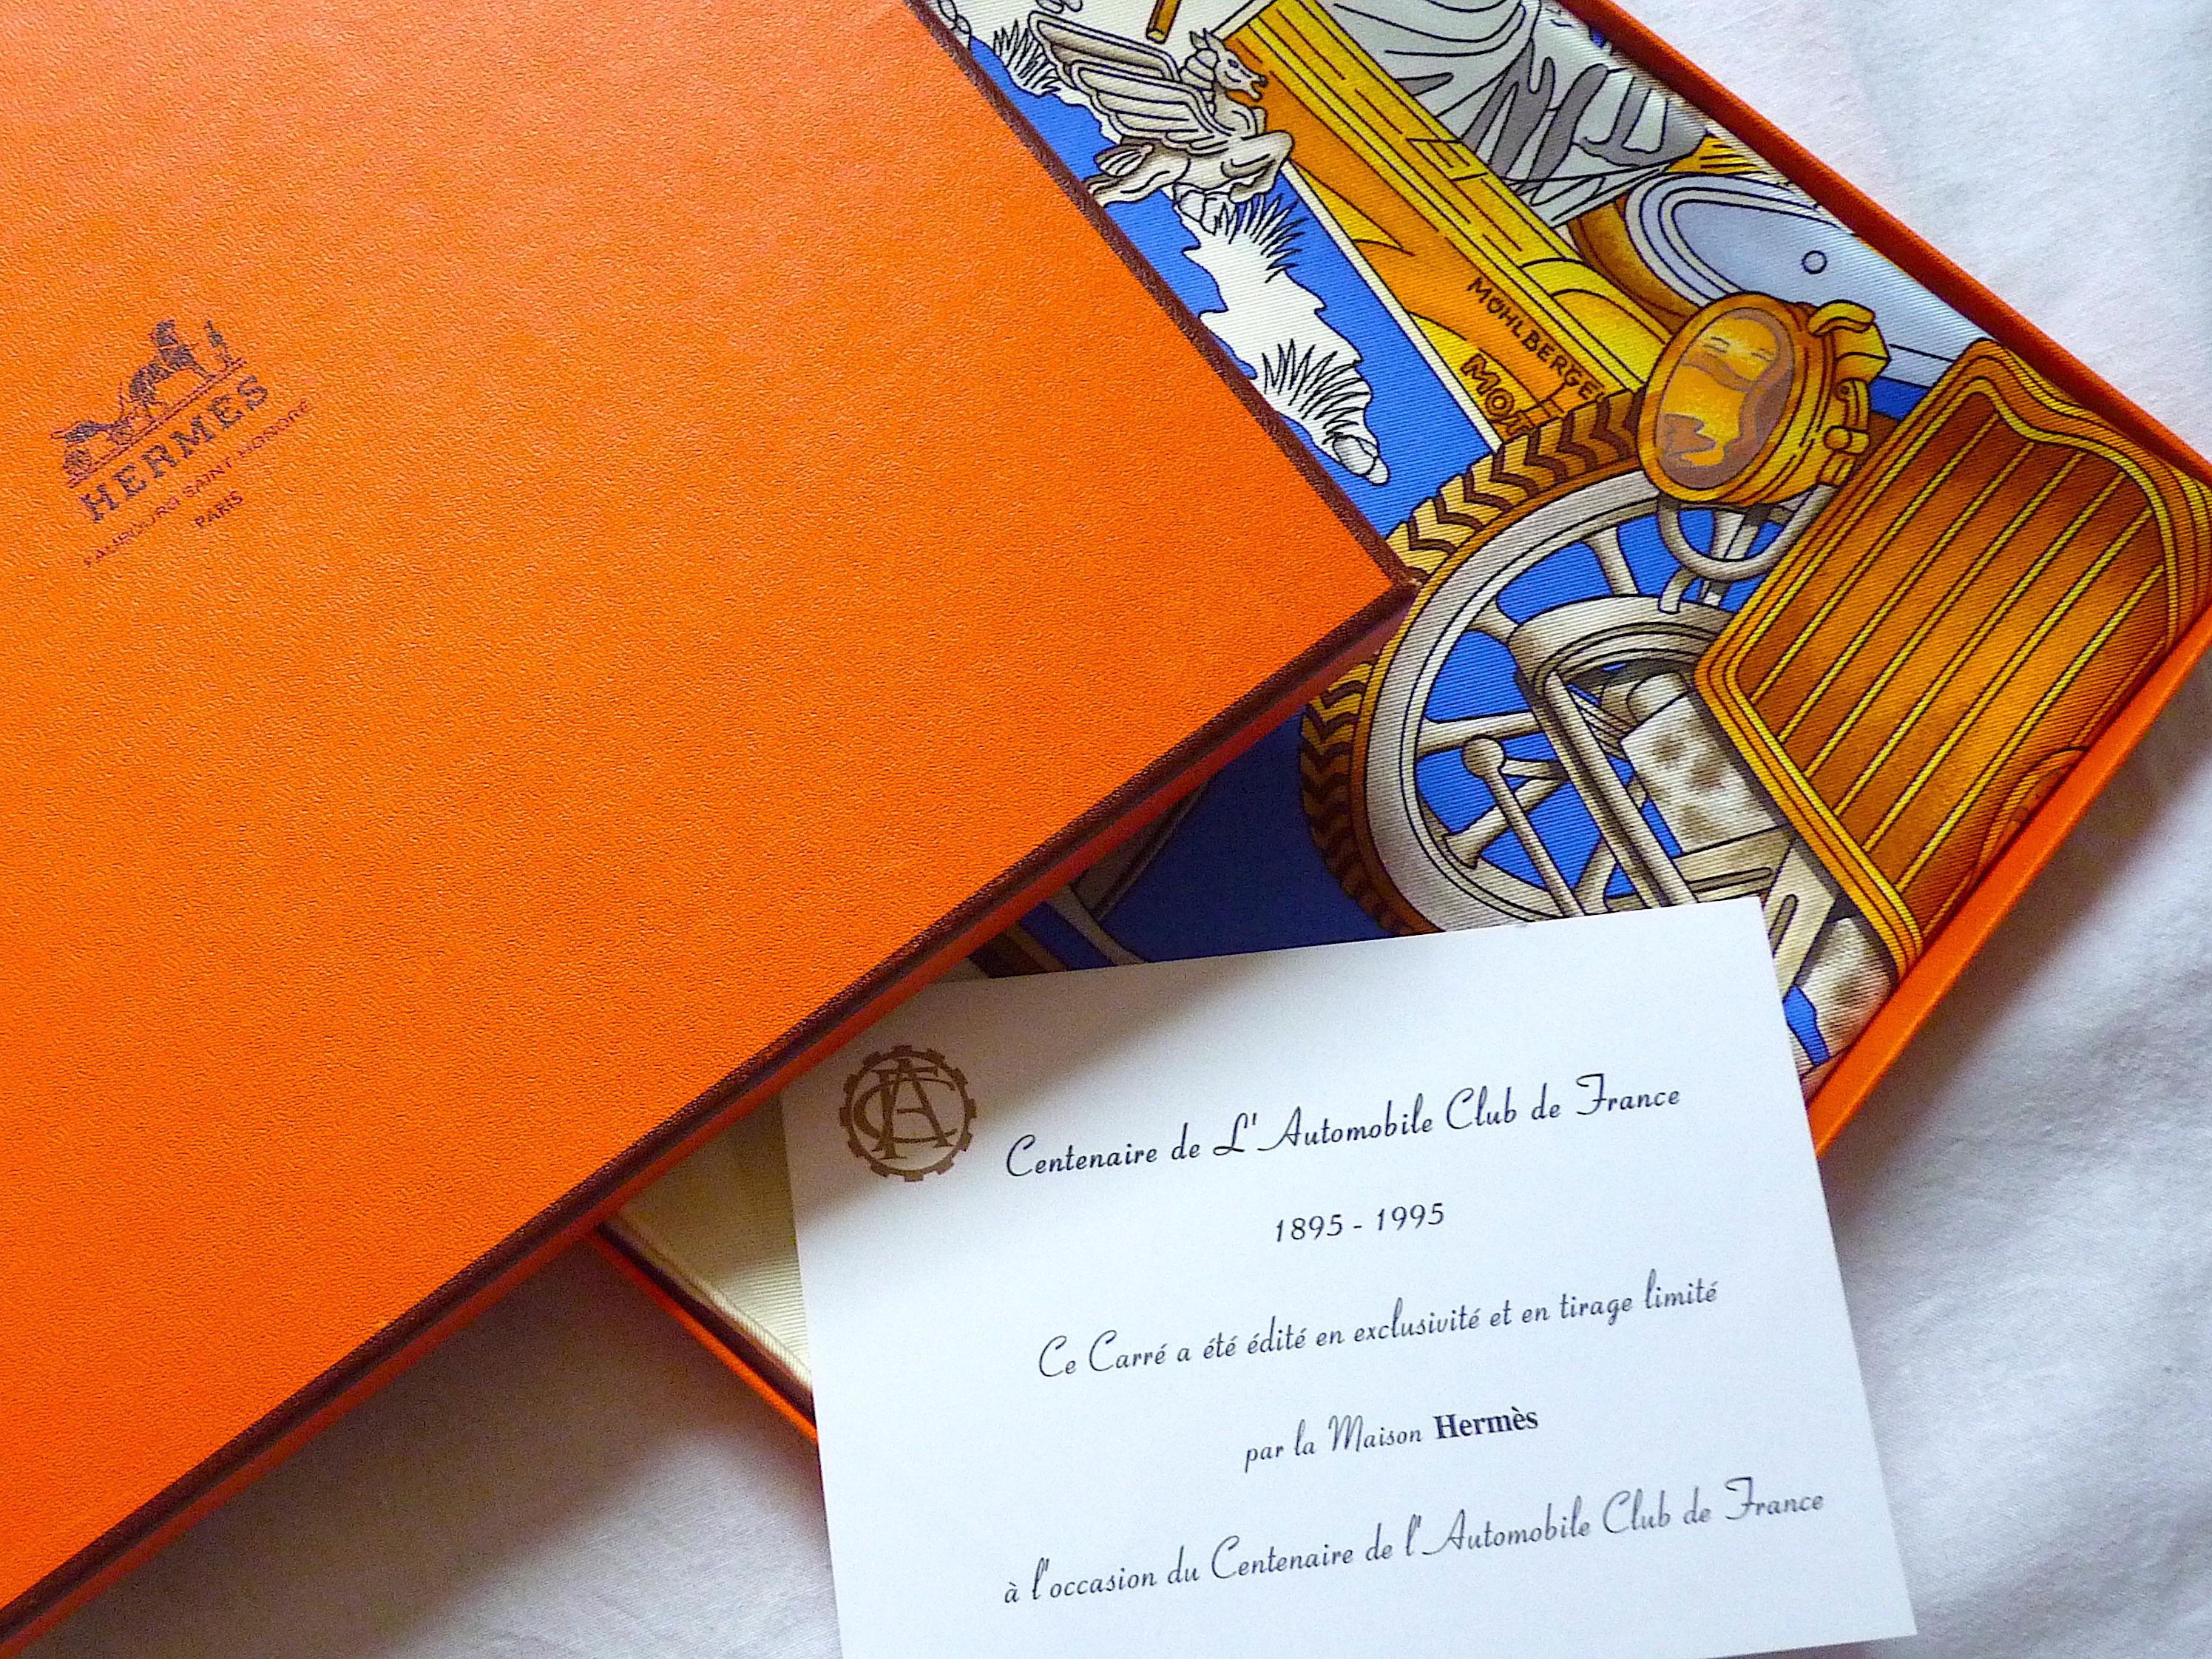 This is a very rare Hermes scarf Automobile Special Edition released in 1995 for the Centenary of Automobile Club de France, Brand New in original Hermès Box.
Very sought after among Hermes Collectors, This ultra rare scarf is Brand new and will